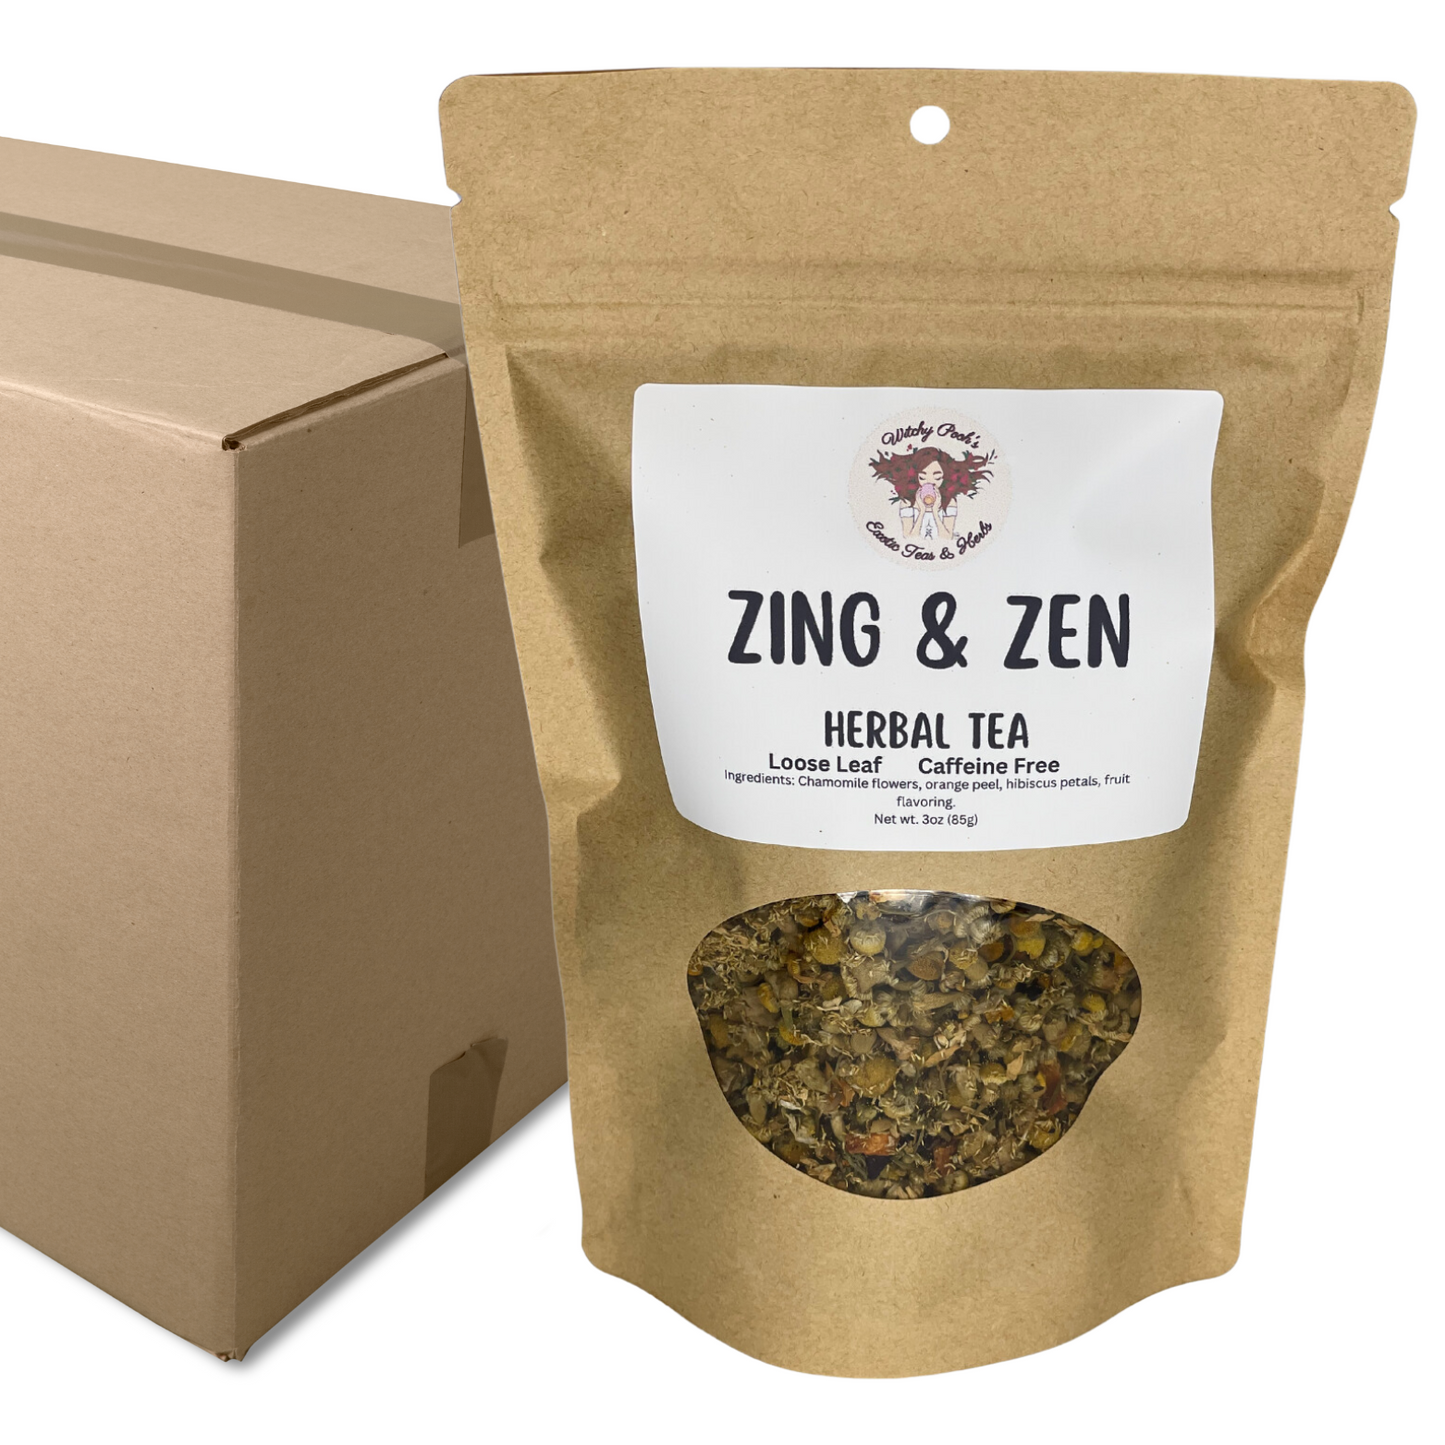 Witchy Pooh's Zing & Zen Loose Leaf Citrus Flavored Chamomile Herbal Tea, Caffeine Free